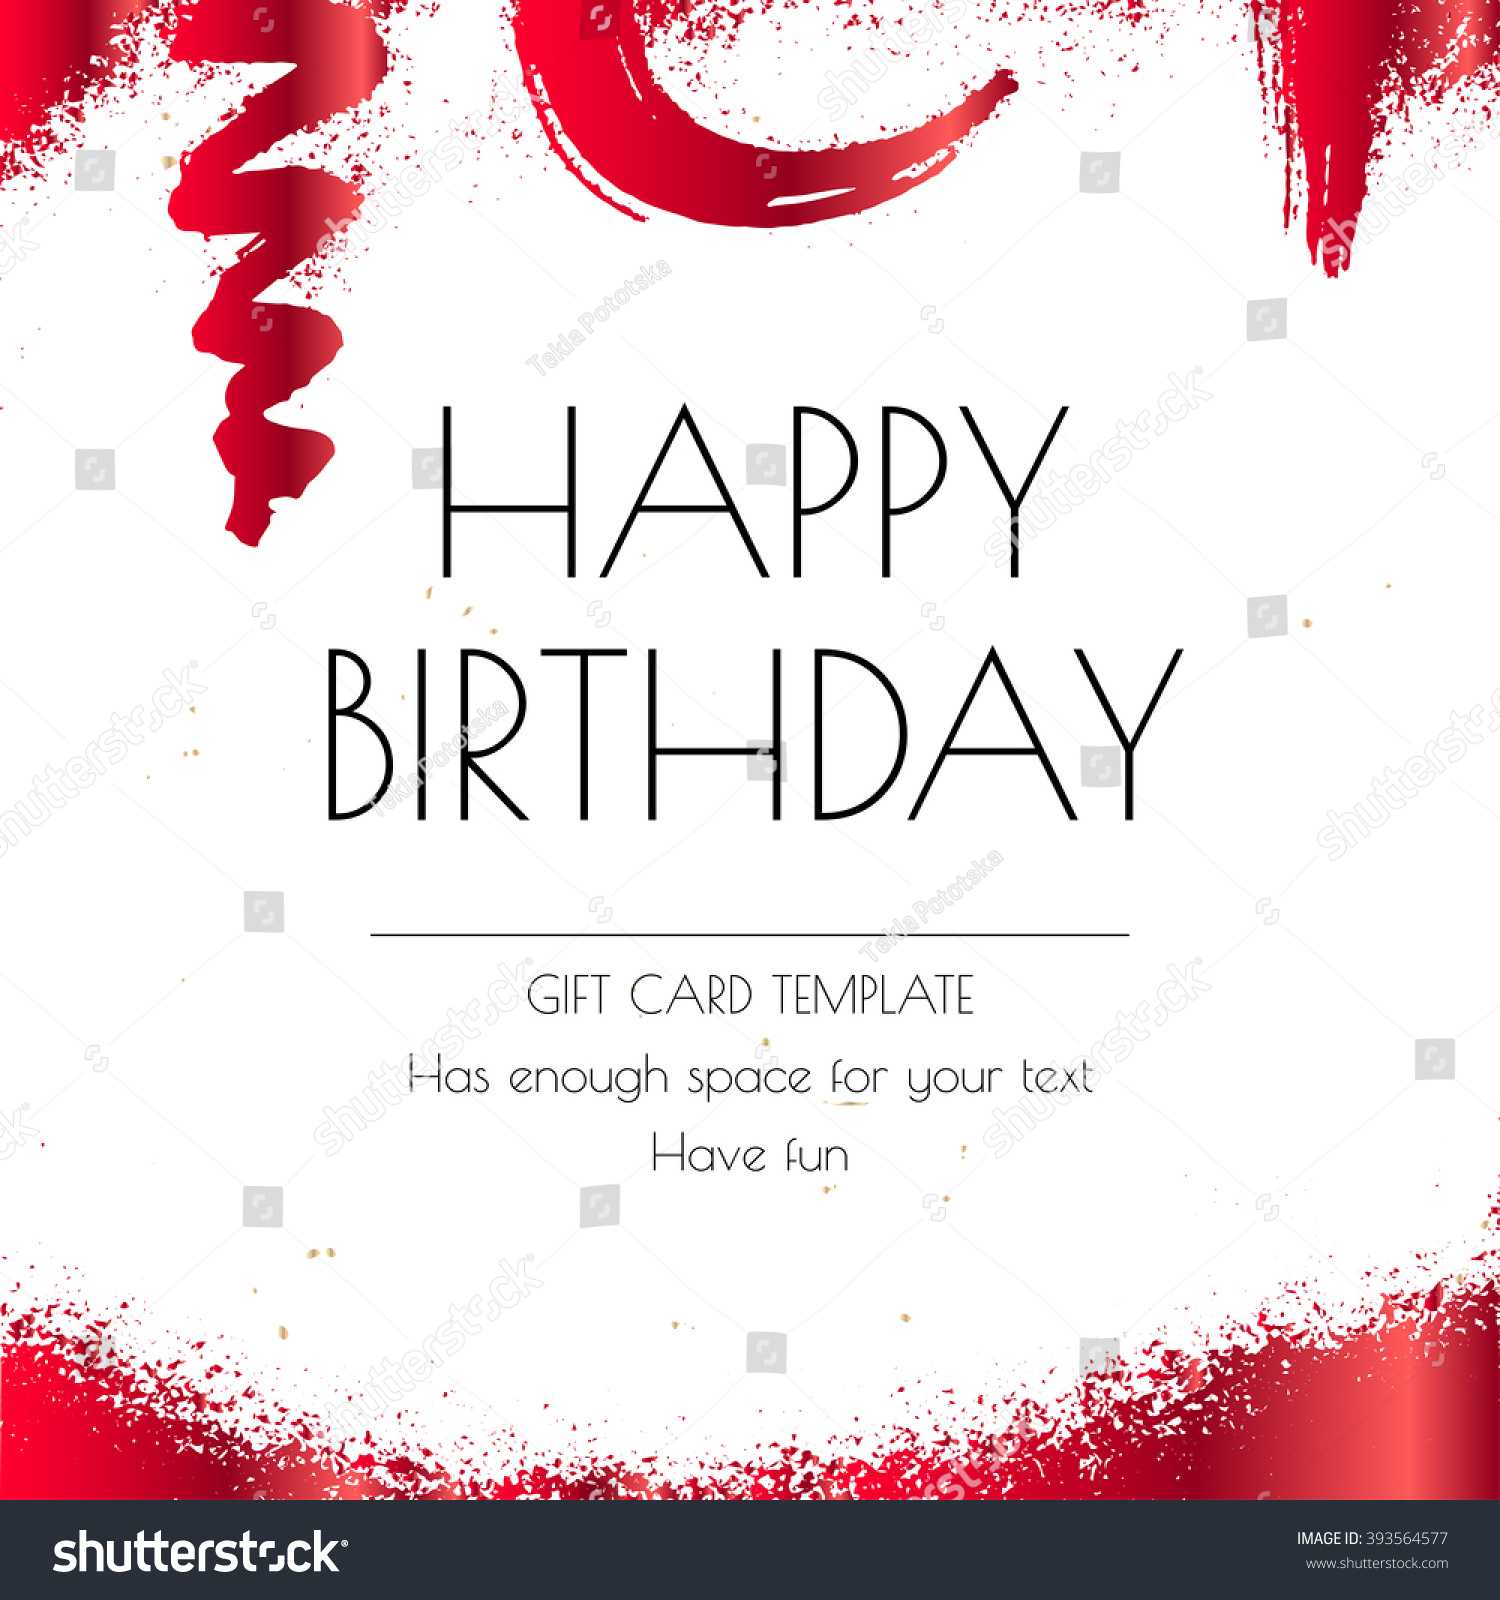 Thank You Card Indesign Template ] – Weekly Calendar Pertaining To Indesign Birthday Card Template